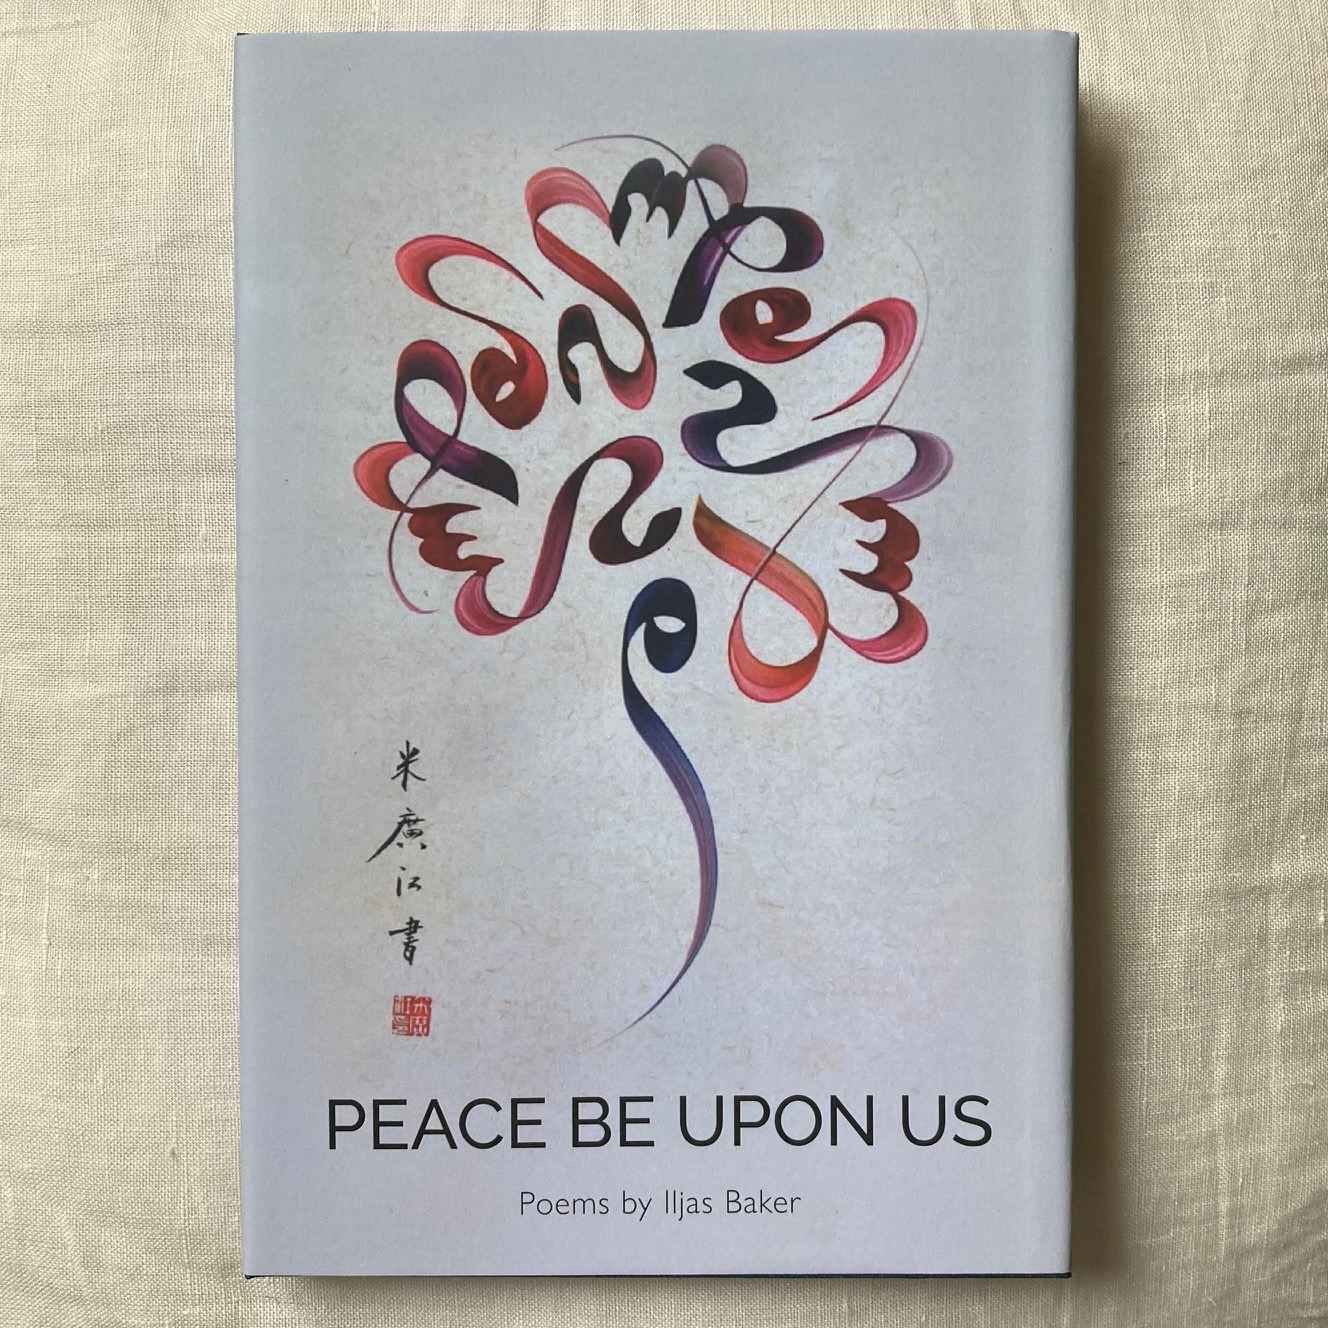 Peace Be Upon Us by Iljas Baker